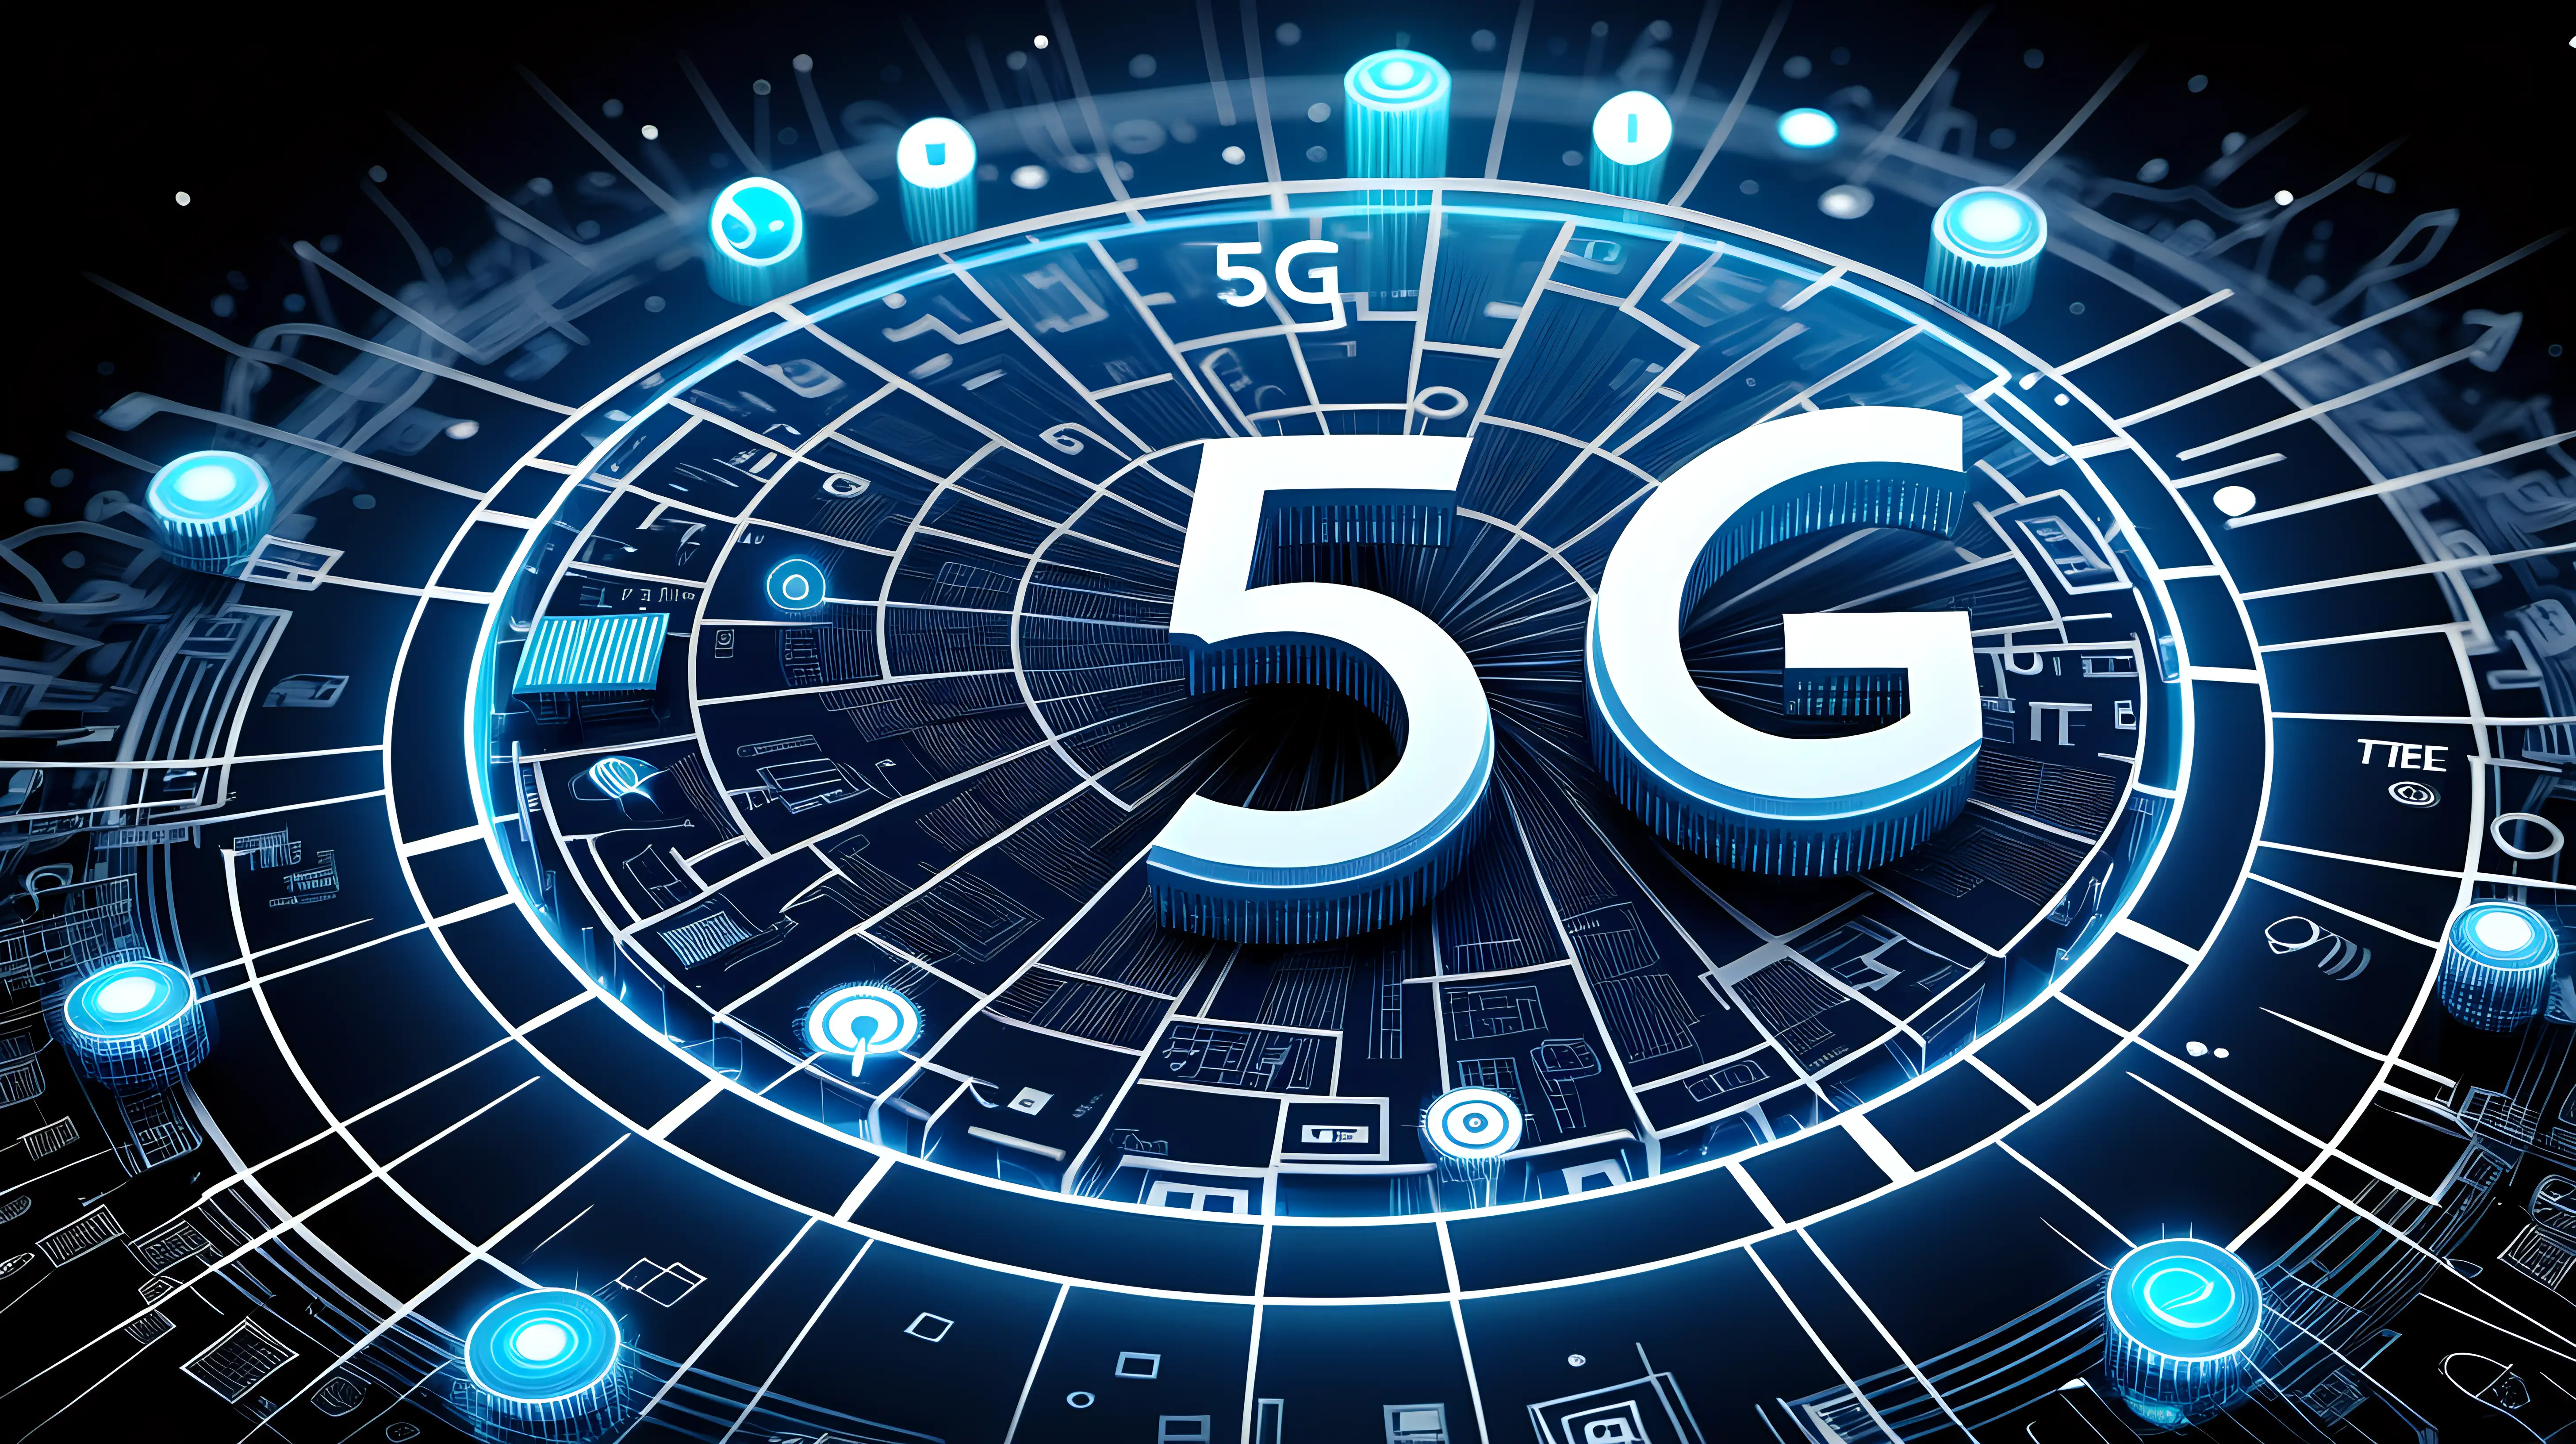 An image that captures the futuristic essence of 5G, with the "5G" text prominently displayed in the center, surrounded by abstract technological patterns and digital elements.